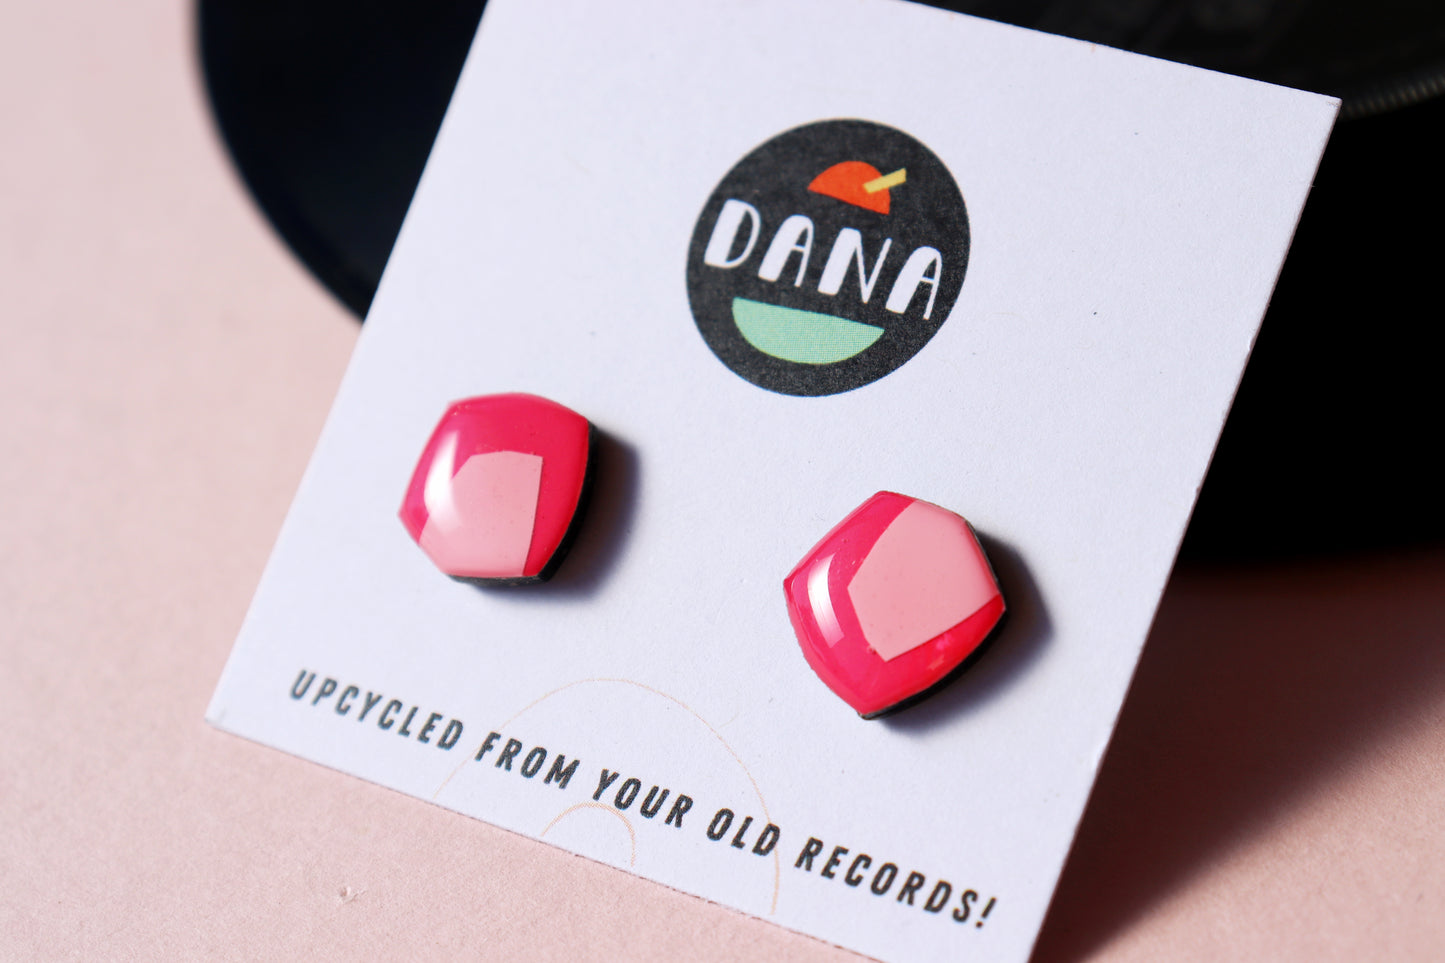 50% OFF / Upcycled vinyl record studs in deep pinky fuchsia and light pink